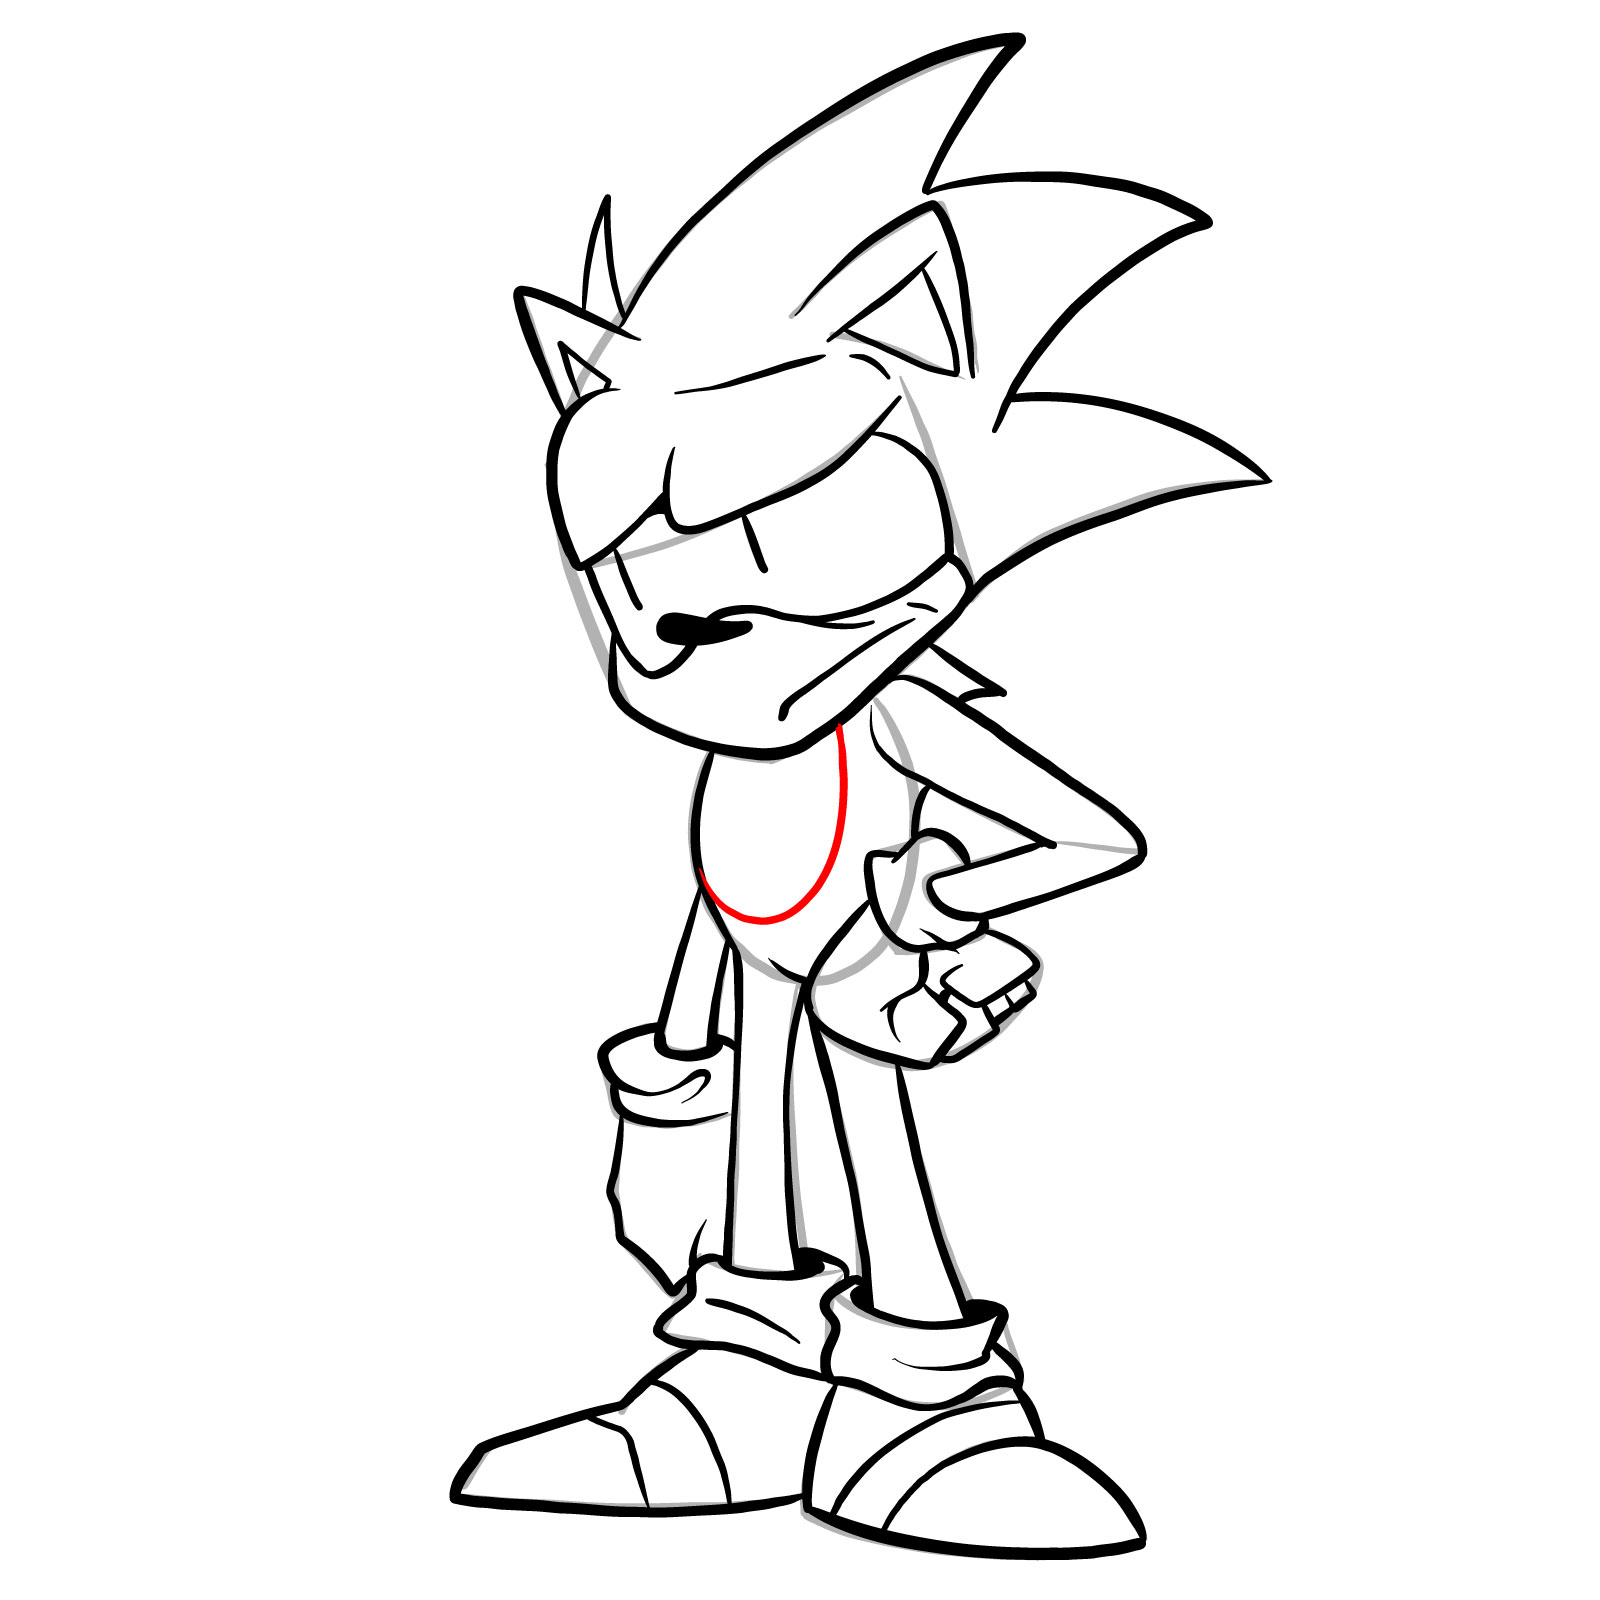 How to draw Sonic - FNF: Secret Histories - step 28